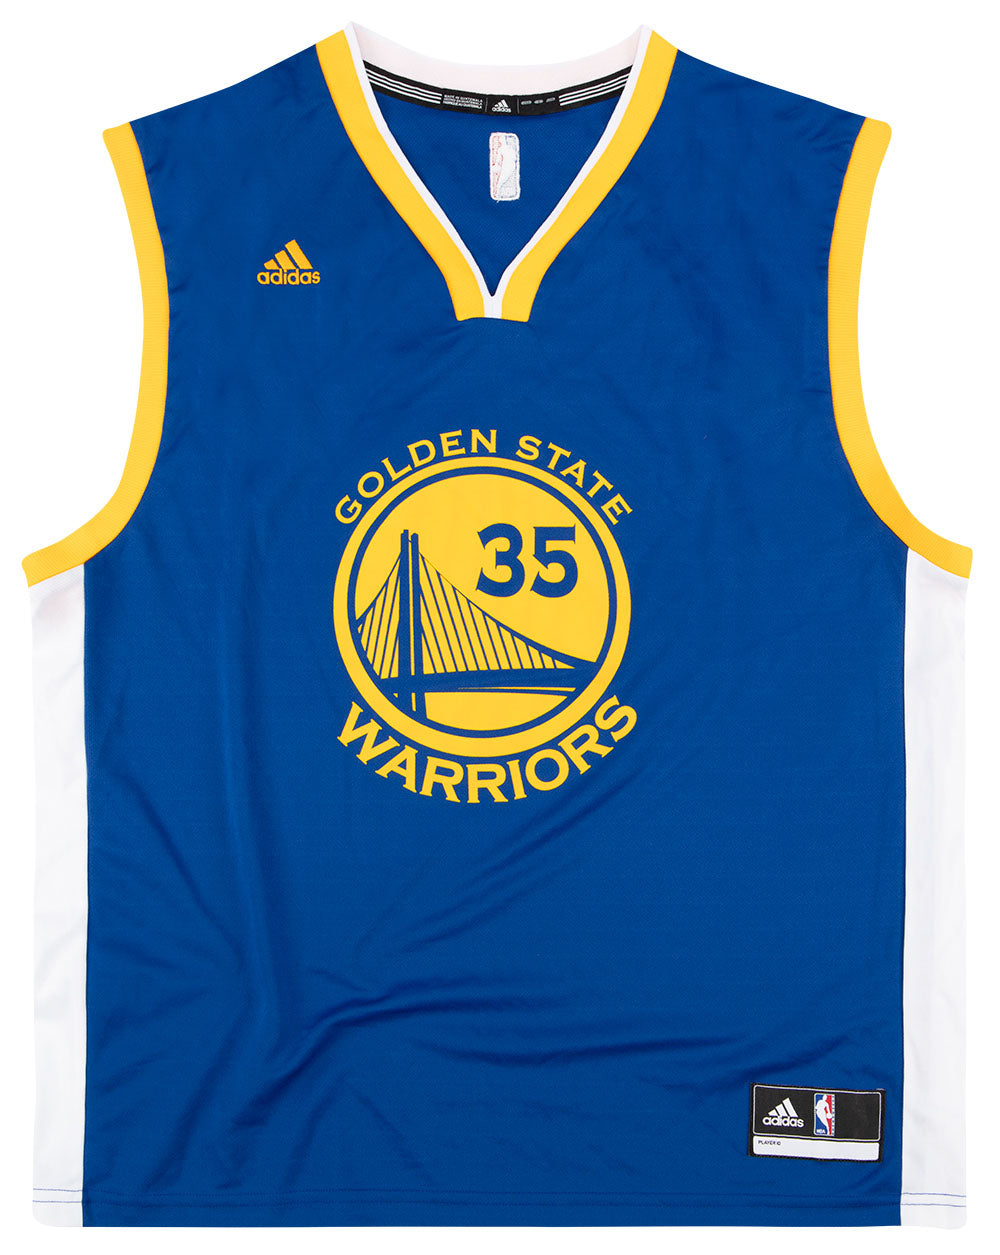 2016-17 GOLDEN STATE WARRIORS DURANT #35 ADIDAS JERSEY (AWAY) XL - Classic  American Sports